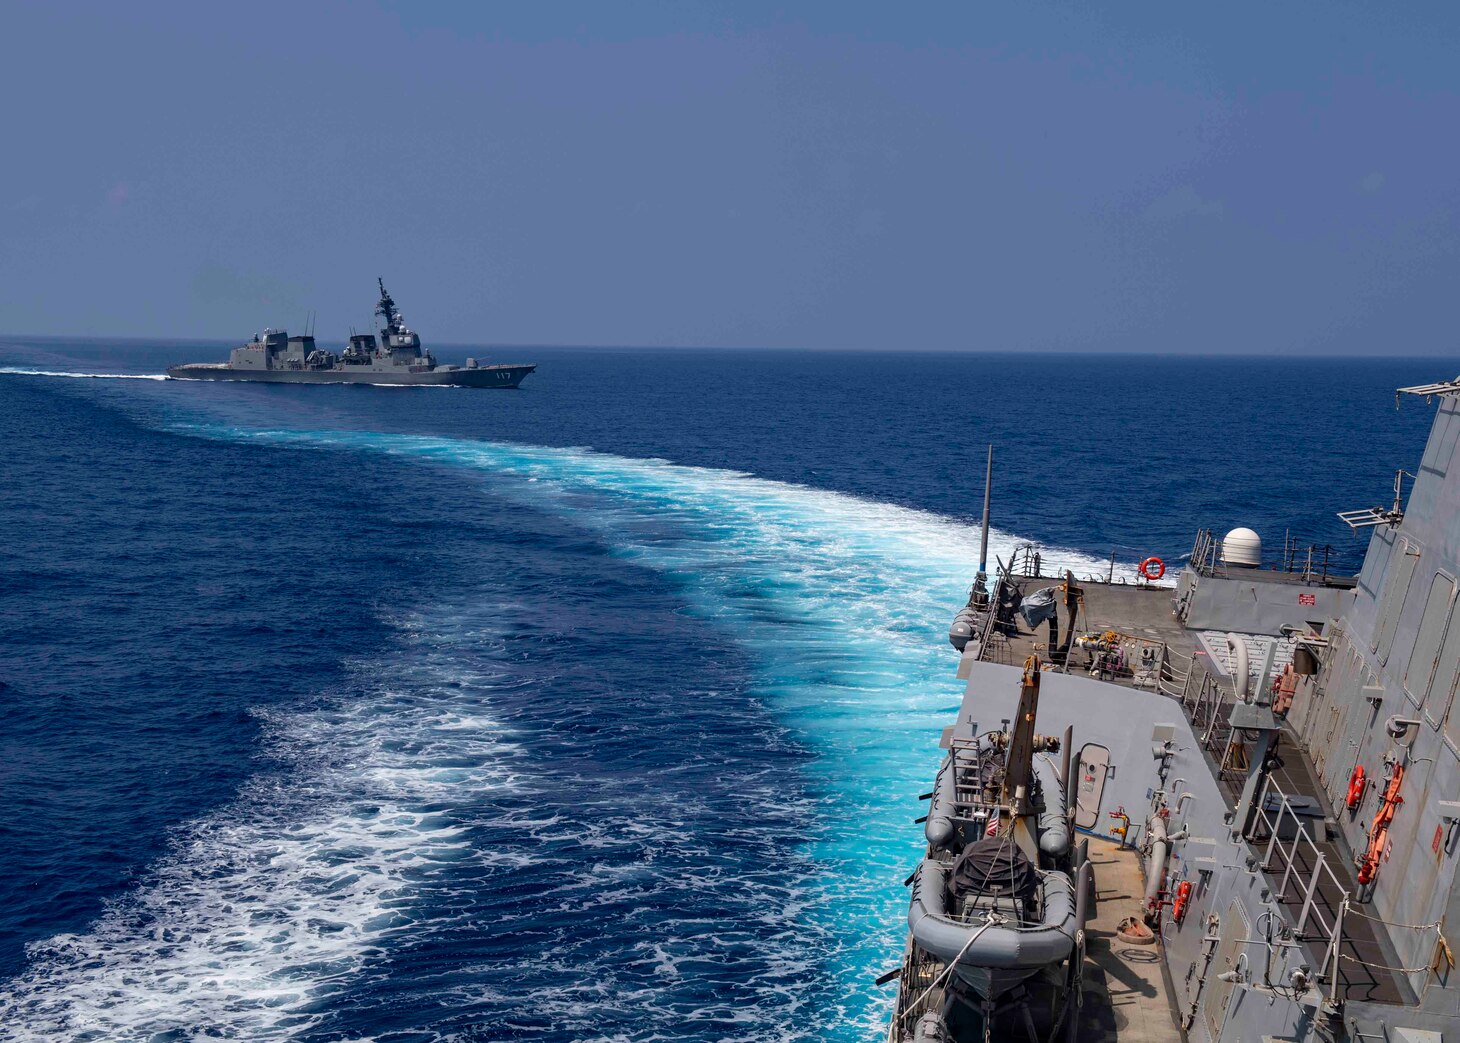 The Arleigh Burke-class guided-missile destroyer USS Mustin (DDG 89) sails alongside the Japanese Maritime Self-Defense Force ship JS Suzutsuki (DD 117). Mustin is underway conducting operations in support of security and stability in the Indo-Pacific while assigned to Destroyer Squadron (DESRON) 15, the Navy’s largest forward-deployed DESRON and the U.S. 7th Fleet’s principal surface force.